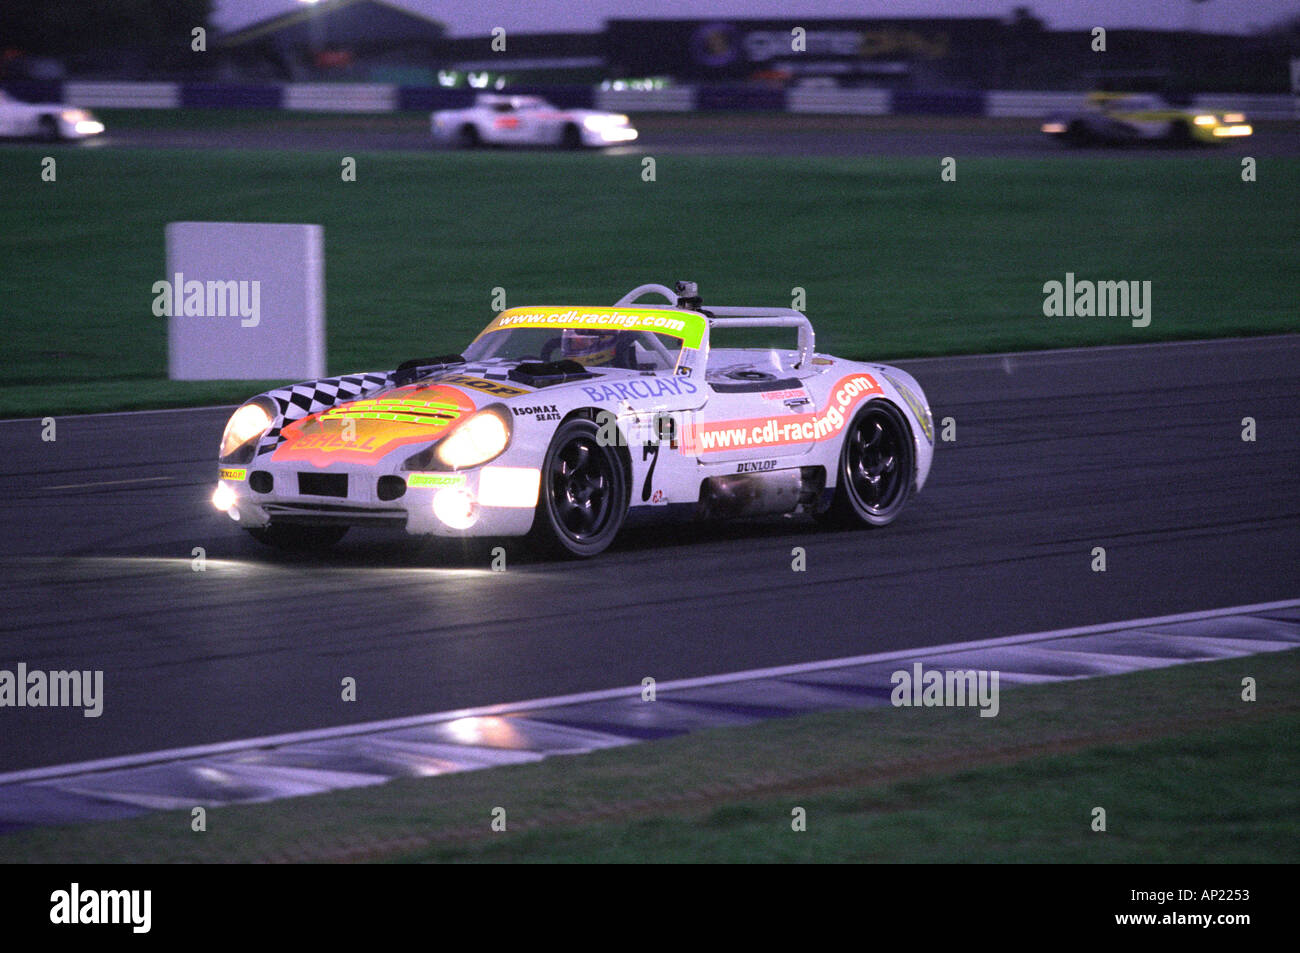 TVR Tuscan Challenge Silverstone at night Stock Photo